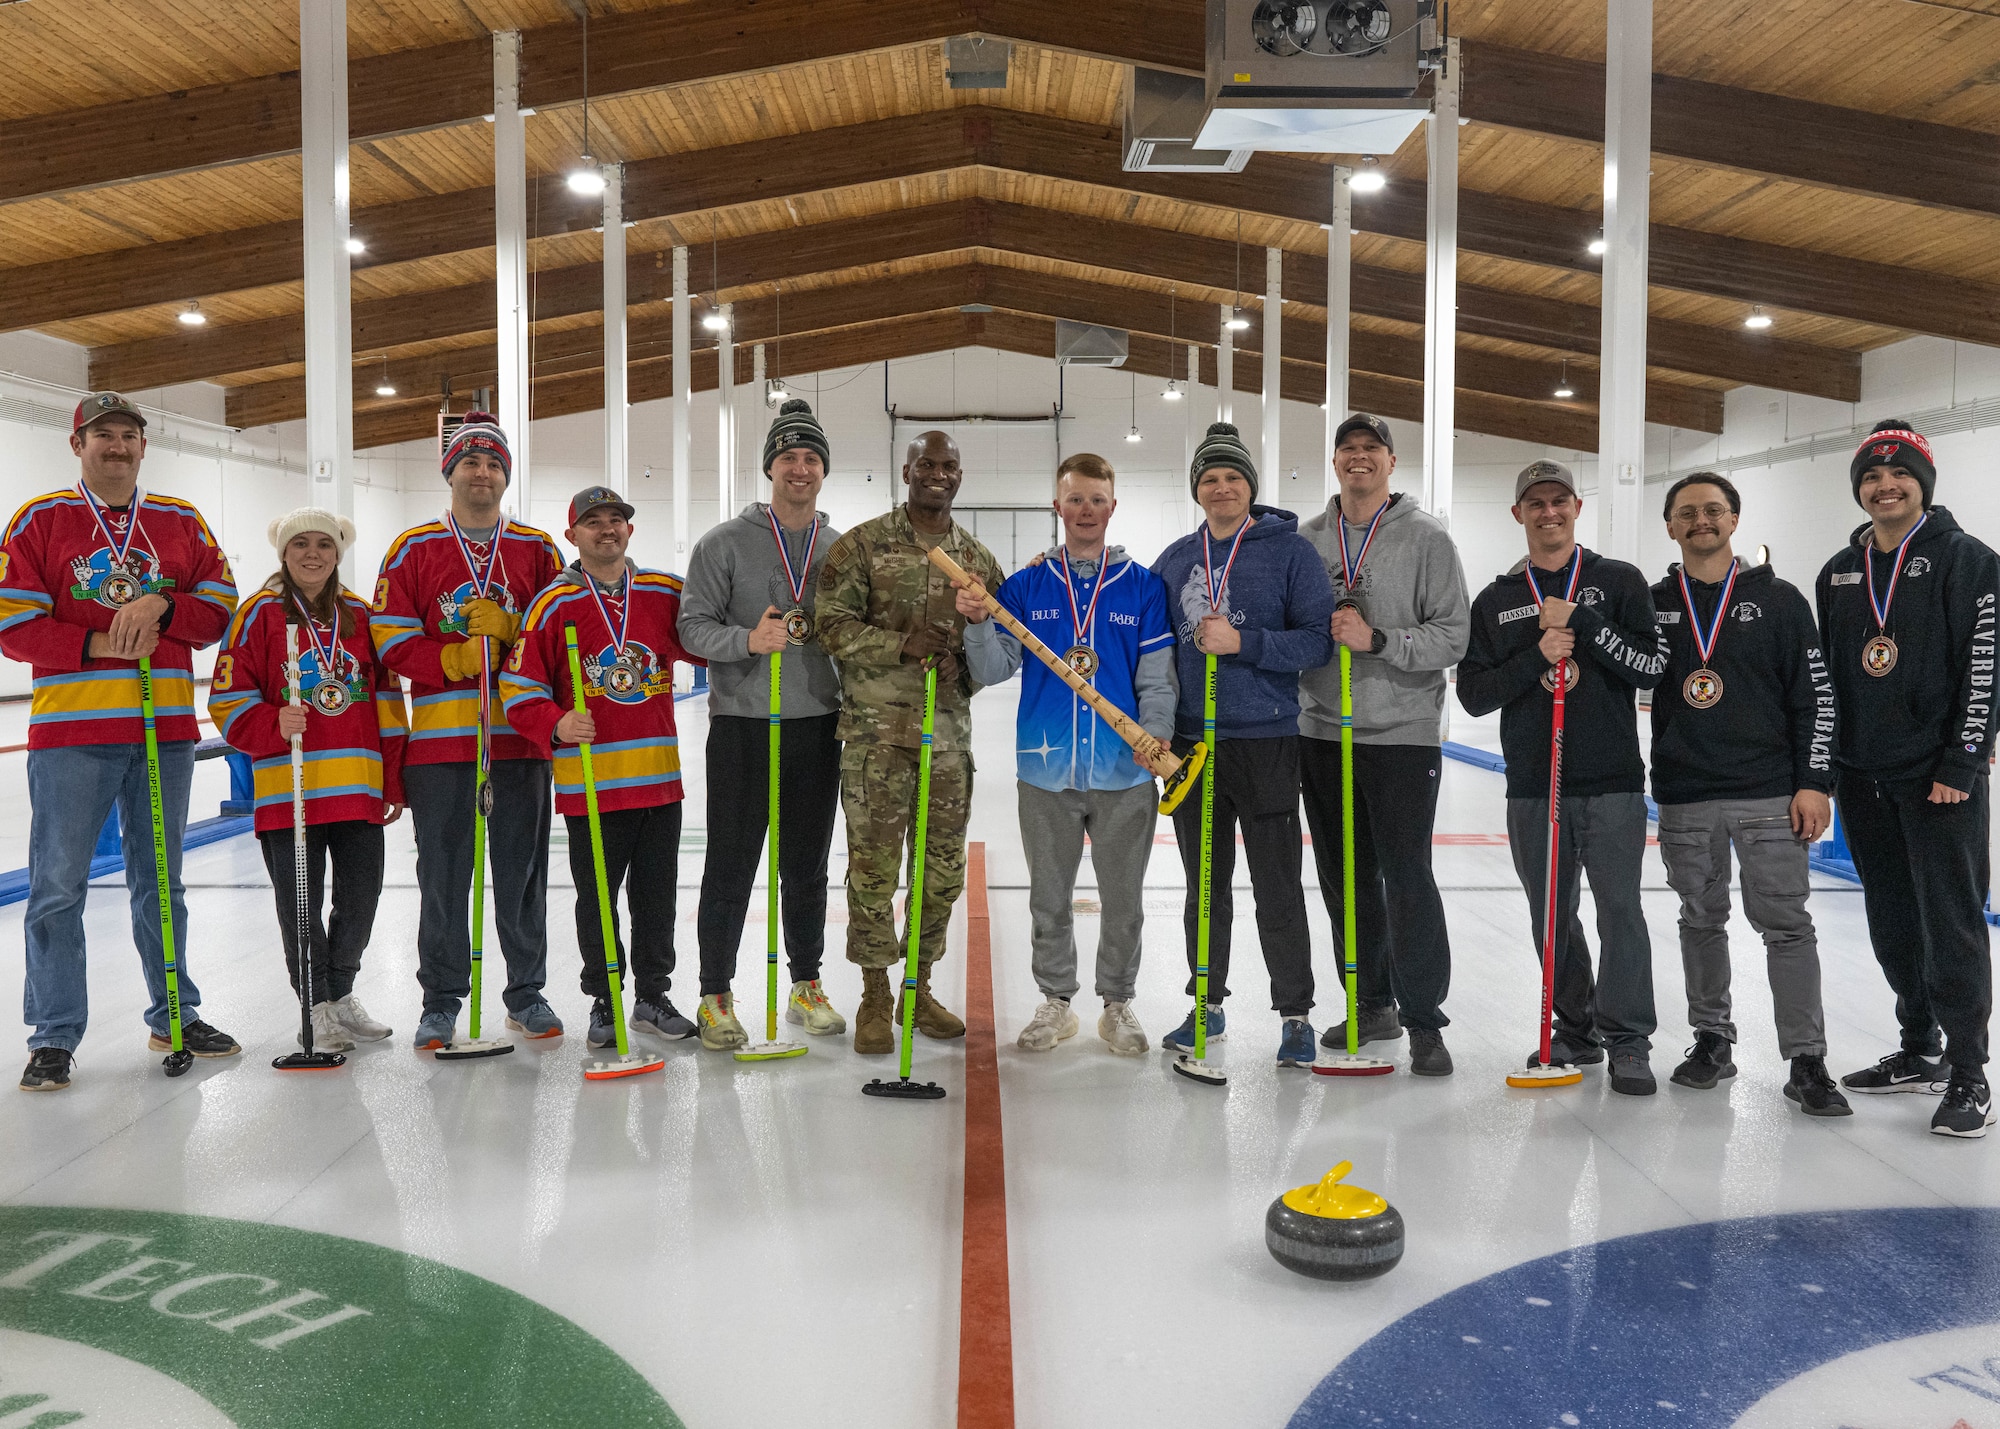 In 2019, a group of Airmen from Minot AFB decided to try their hand at the sport of curling. This led to the formation of the Minot AFB Curling League. Every winter, they build camaraderie and resilience through curling competition.